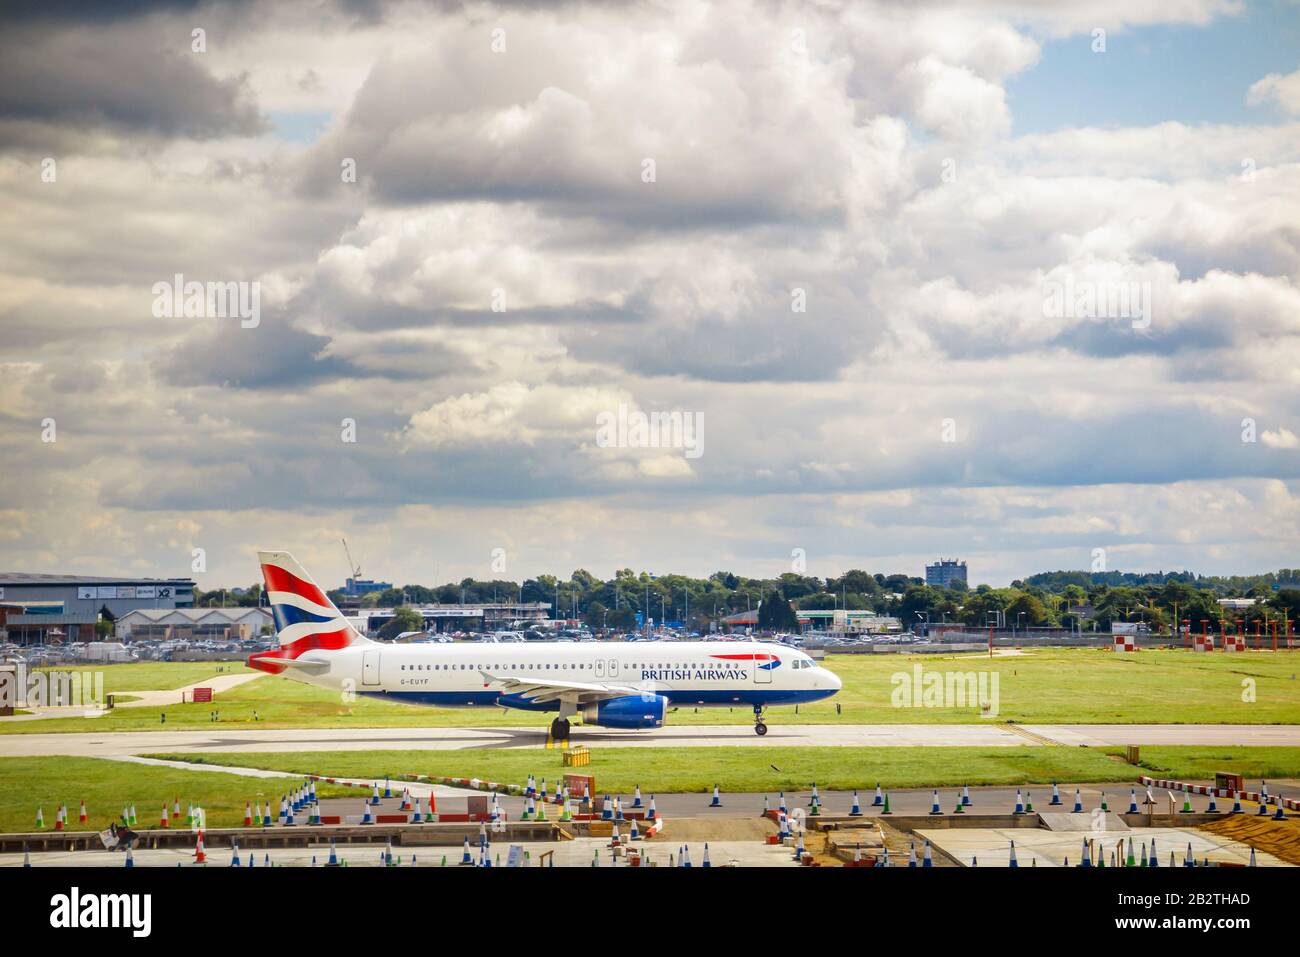 British Airways Airbus A320-232 in corporate livery standing on the runway in London Heathrow Airport viewed from Terminal 3 under dark gloomy clouds Stock Photo